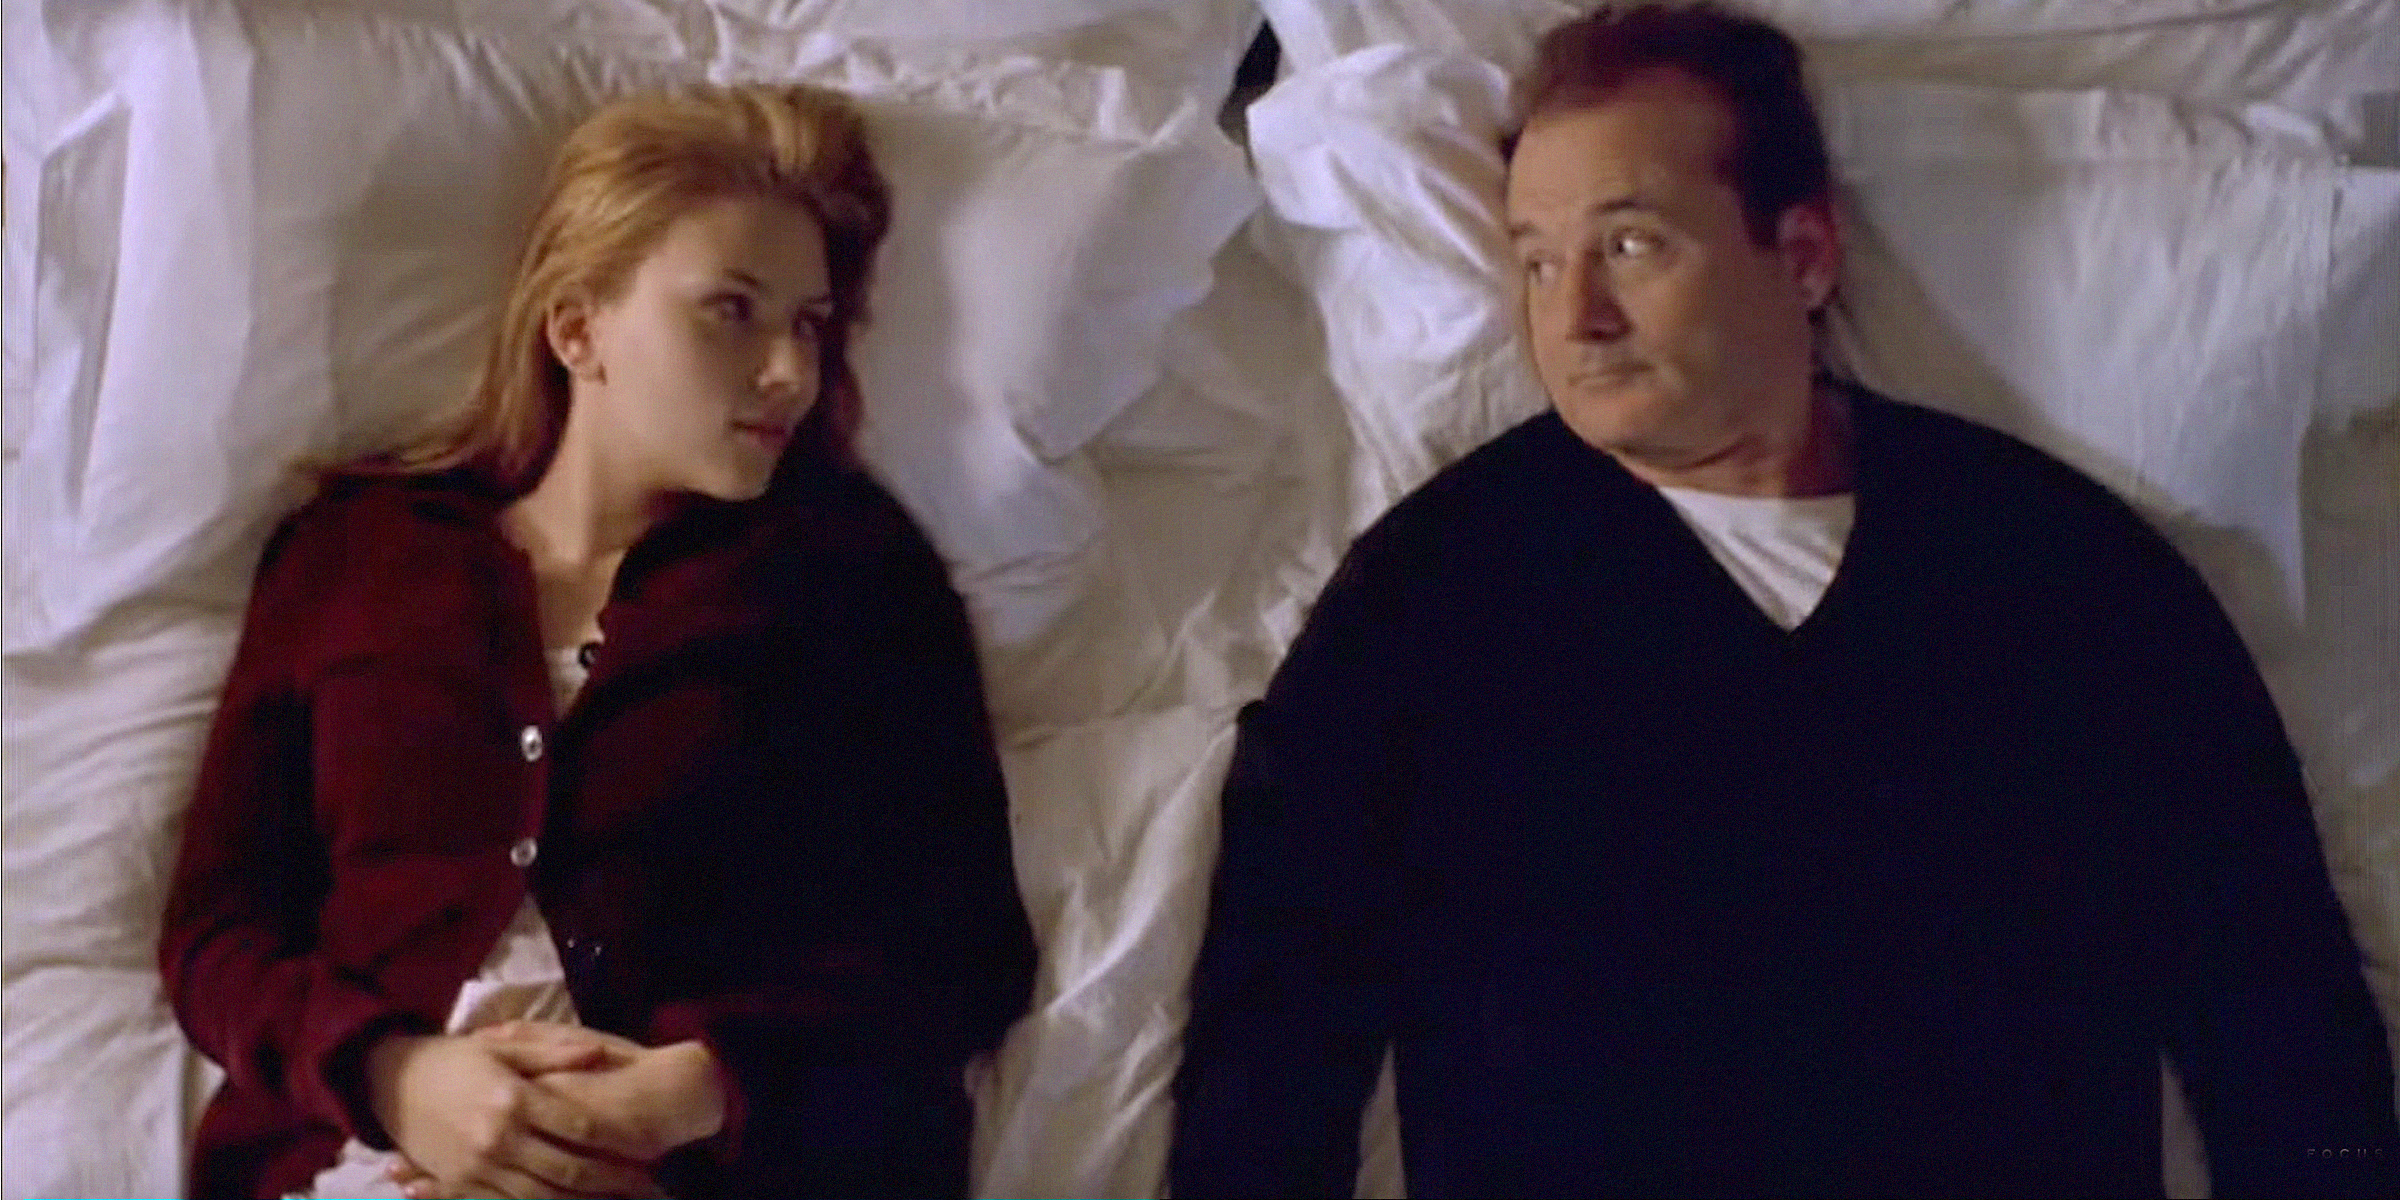 Scarlett Johansson and Bill Murray | Source: YouTube/FocusFeatures